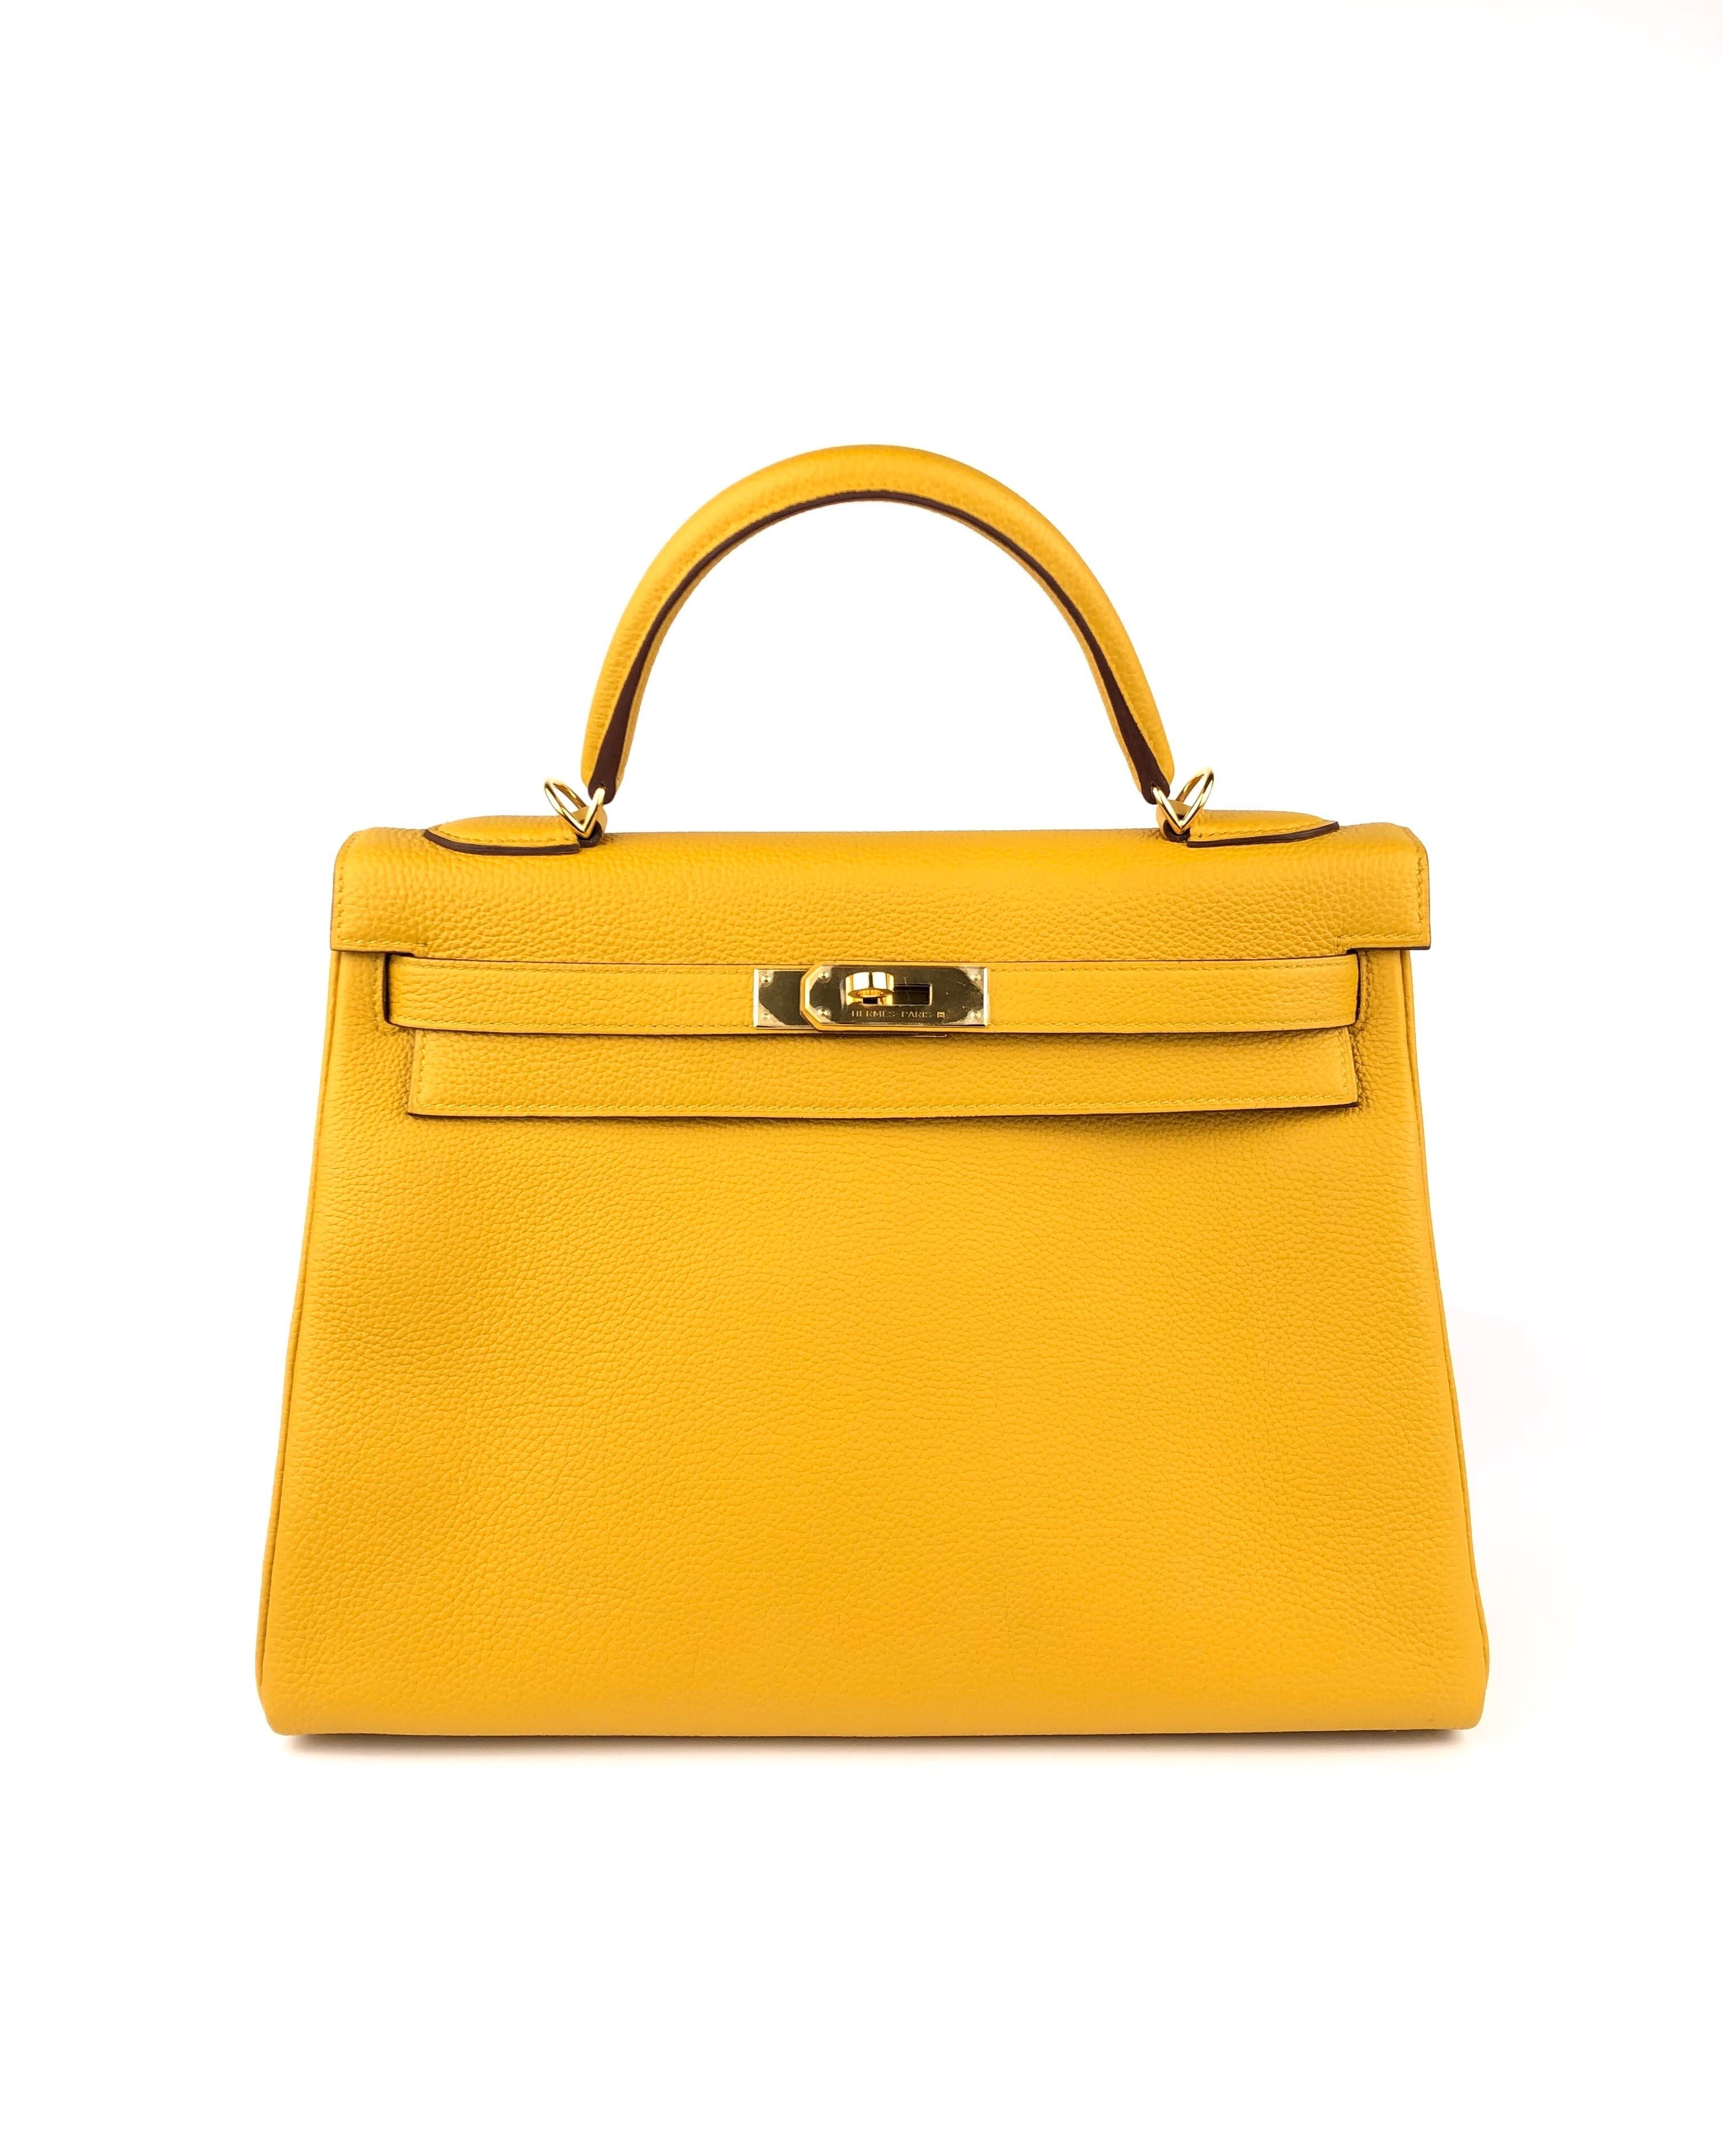 Hermes Kelly 32 Jaune Ambre Yellow Togo Gold Hardware. MINT CONDITION WITH ALL PLASTIC EXCEPT ON ONE FOOT 98% LIKE NEW! C STAMP 2018!
*MISSING LEATHER CLOCHETTE*

Shop with confidence from Lux Addicts. Authenticity guaranteed or money back.